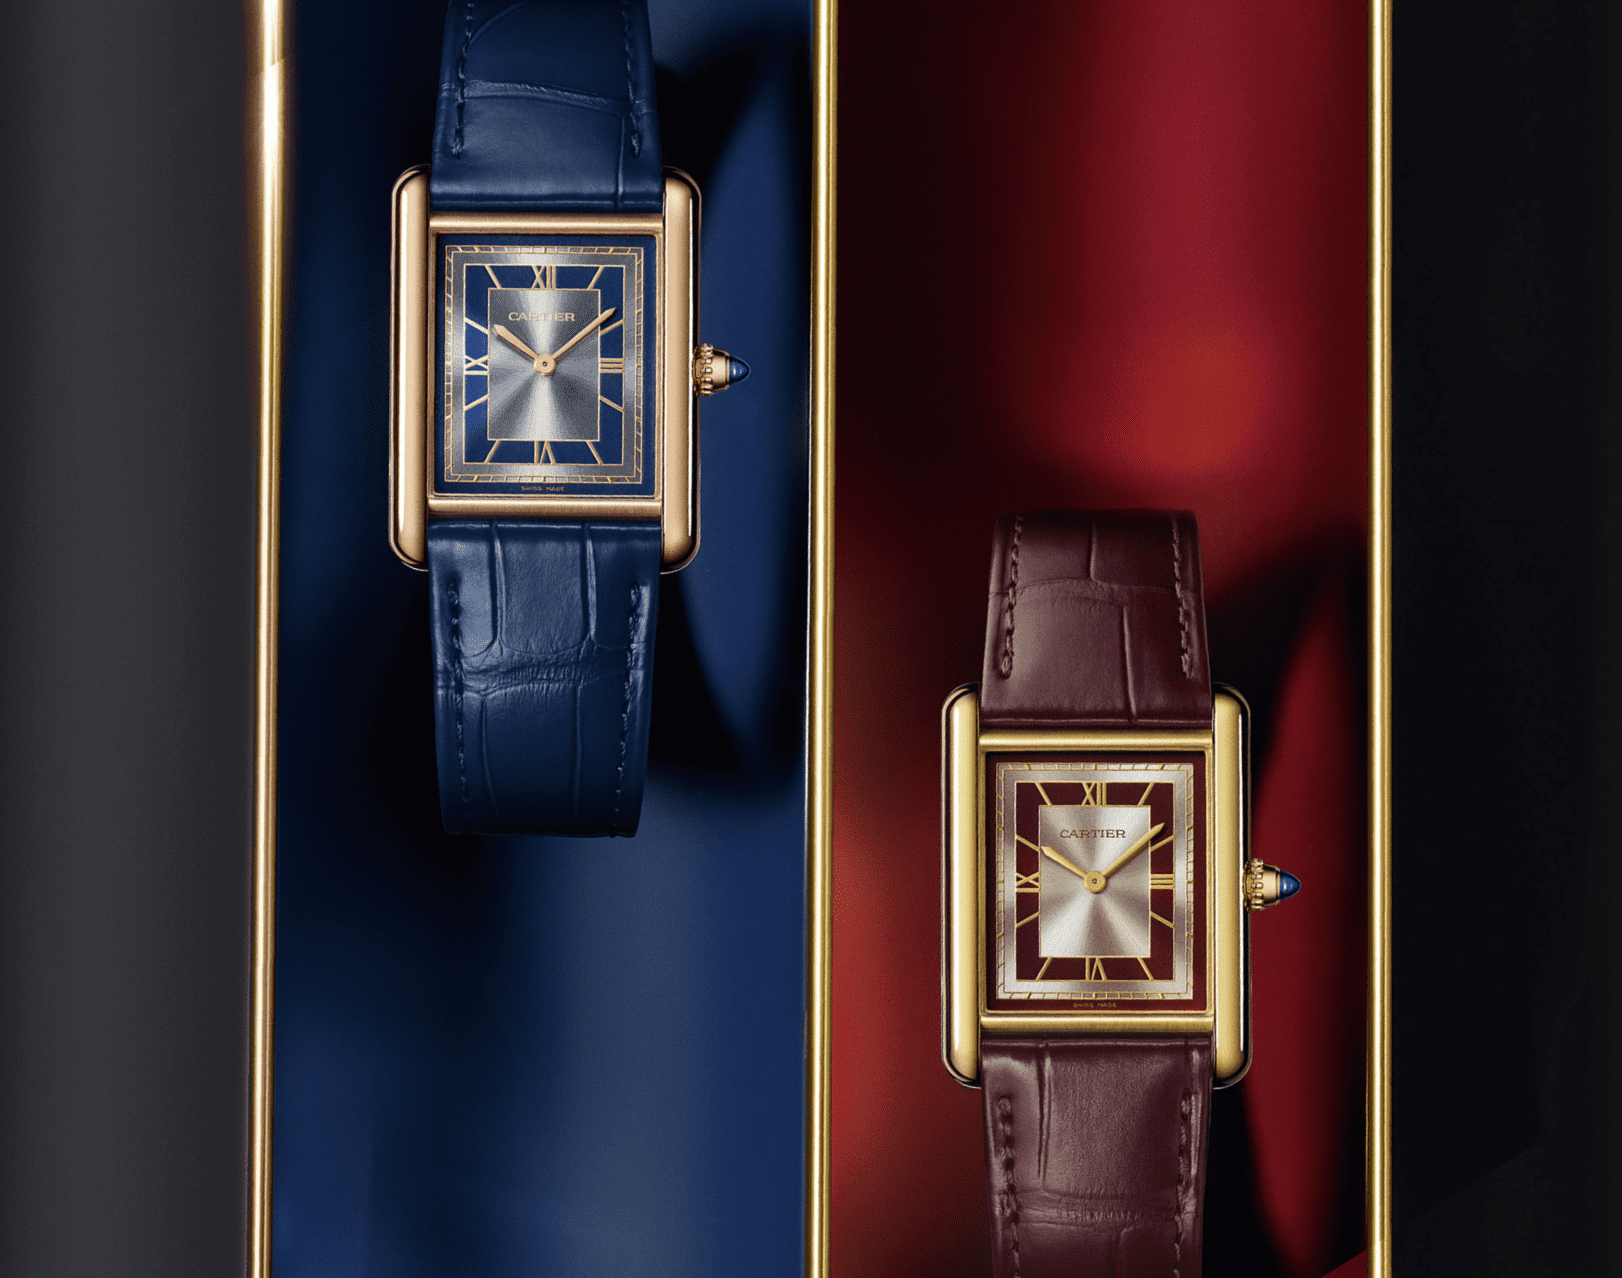 INTRODUCING: The Tank Louis Cartier collection is a revival of Art Deco flamboyance